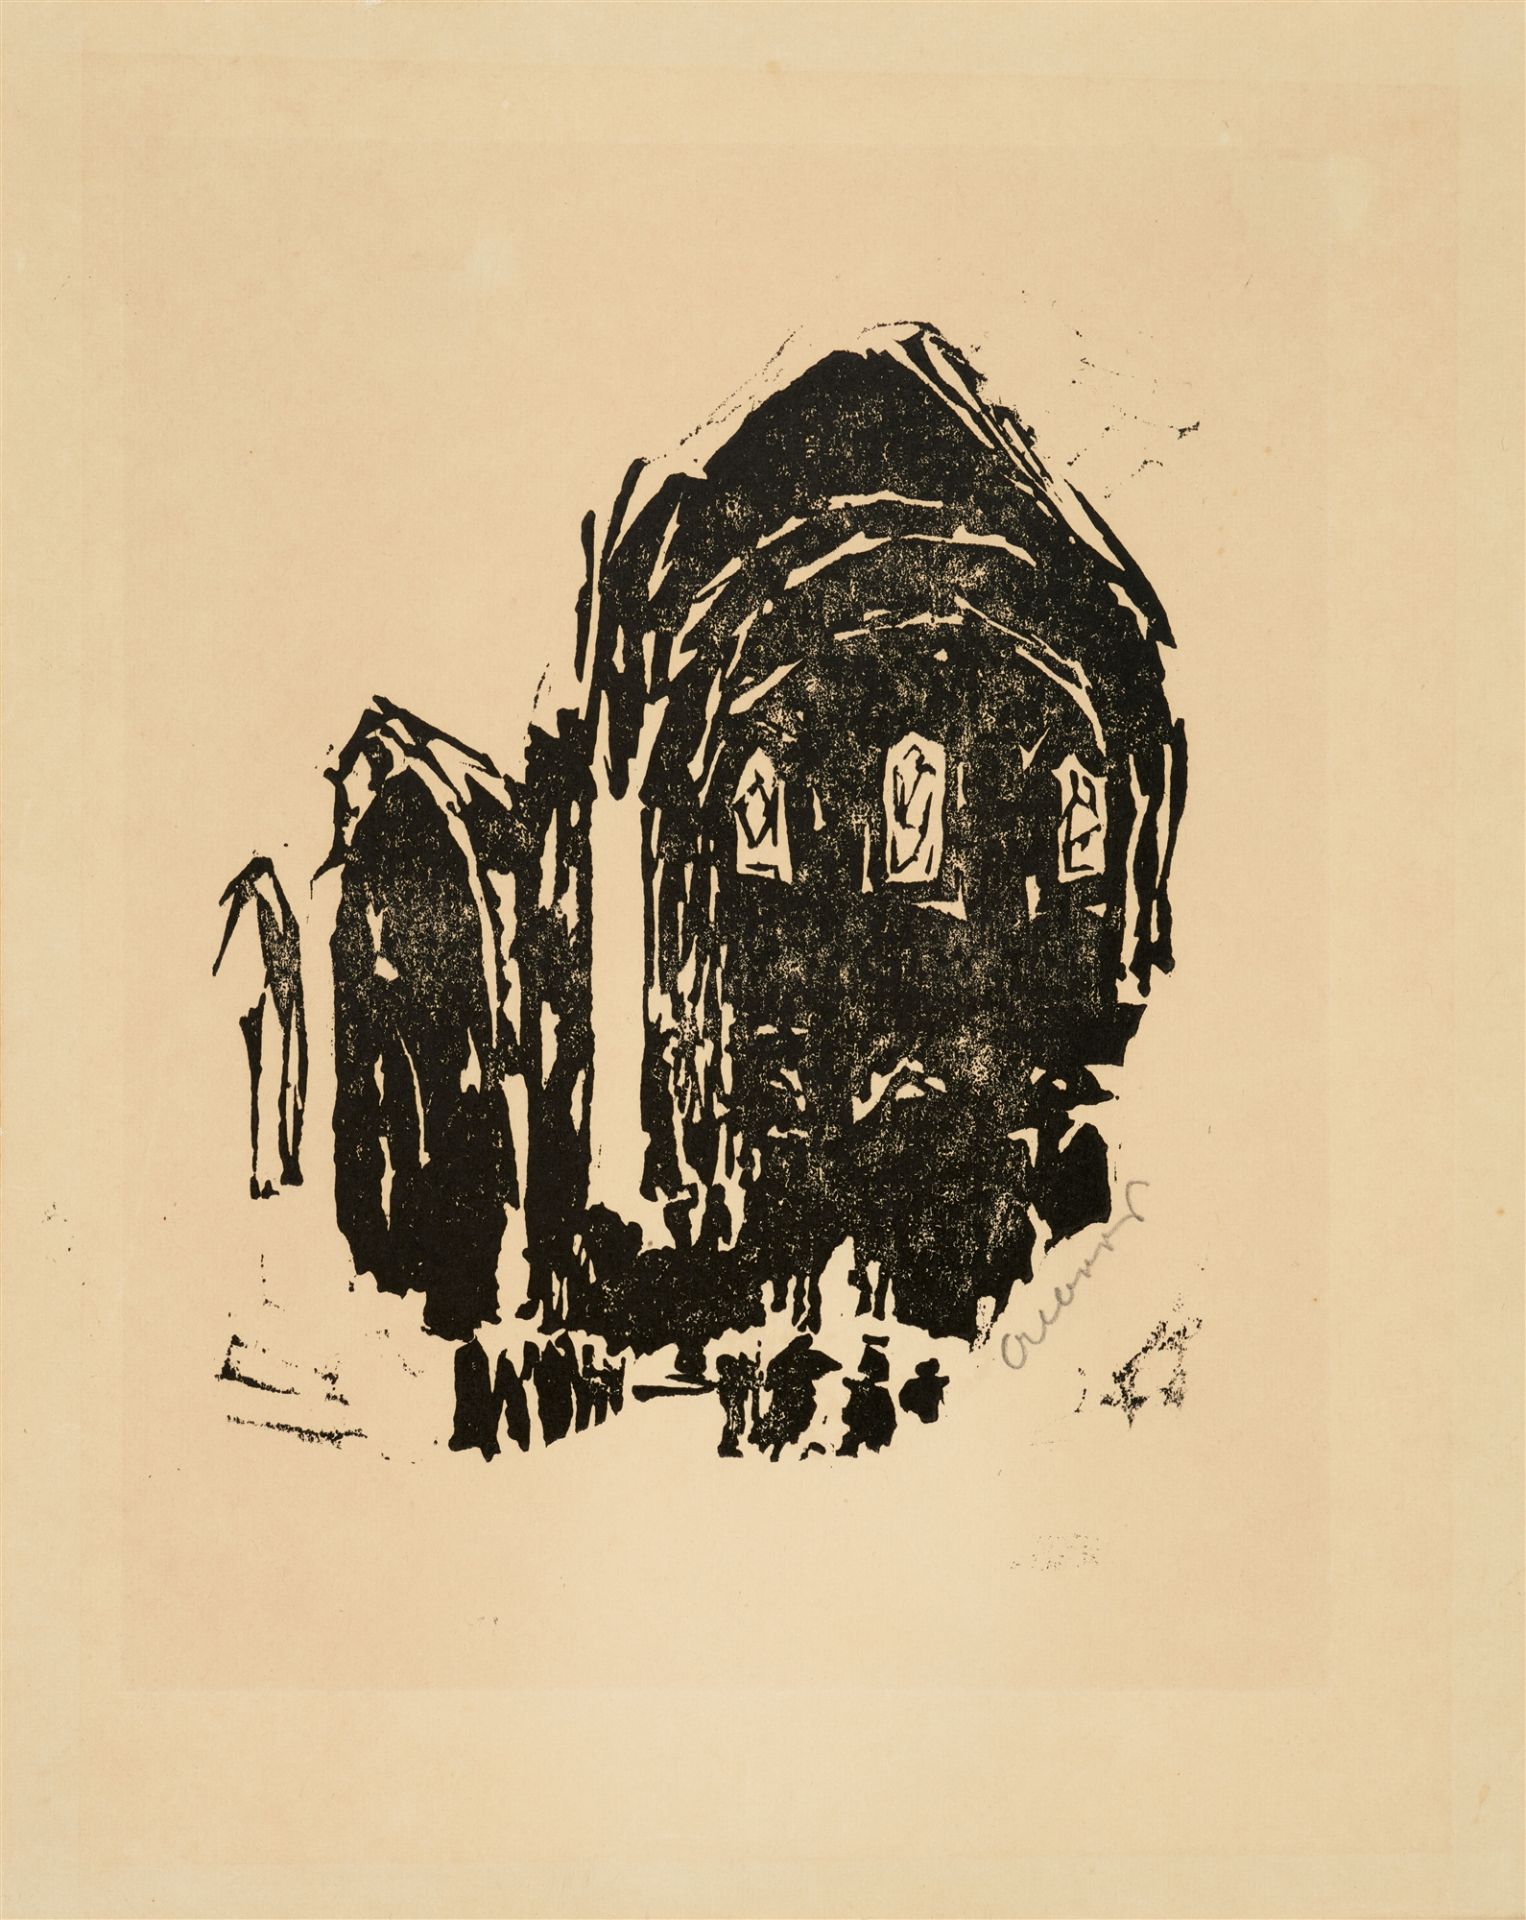 Josef Albers, In the Cathedral: Small Middle Nave